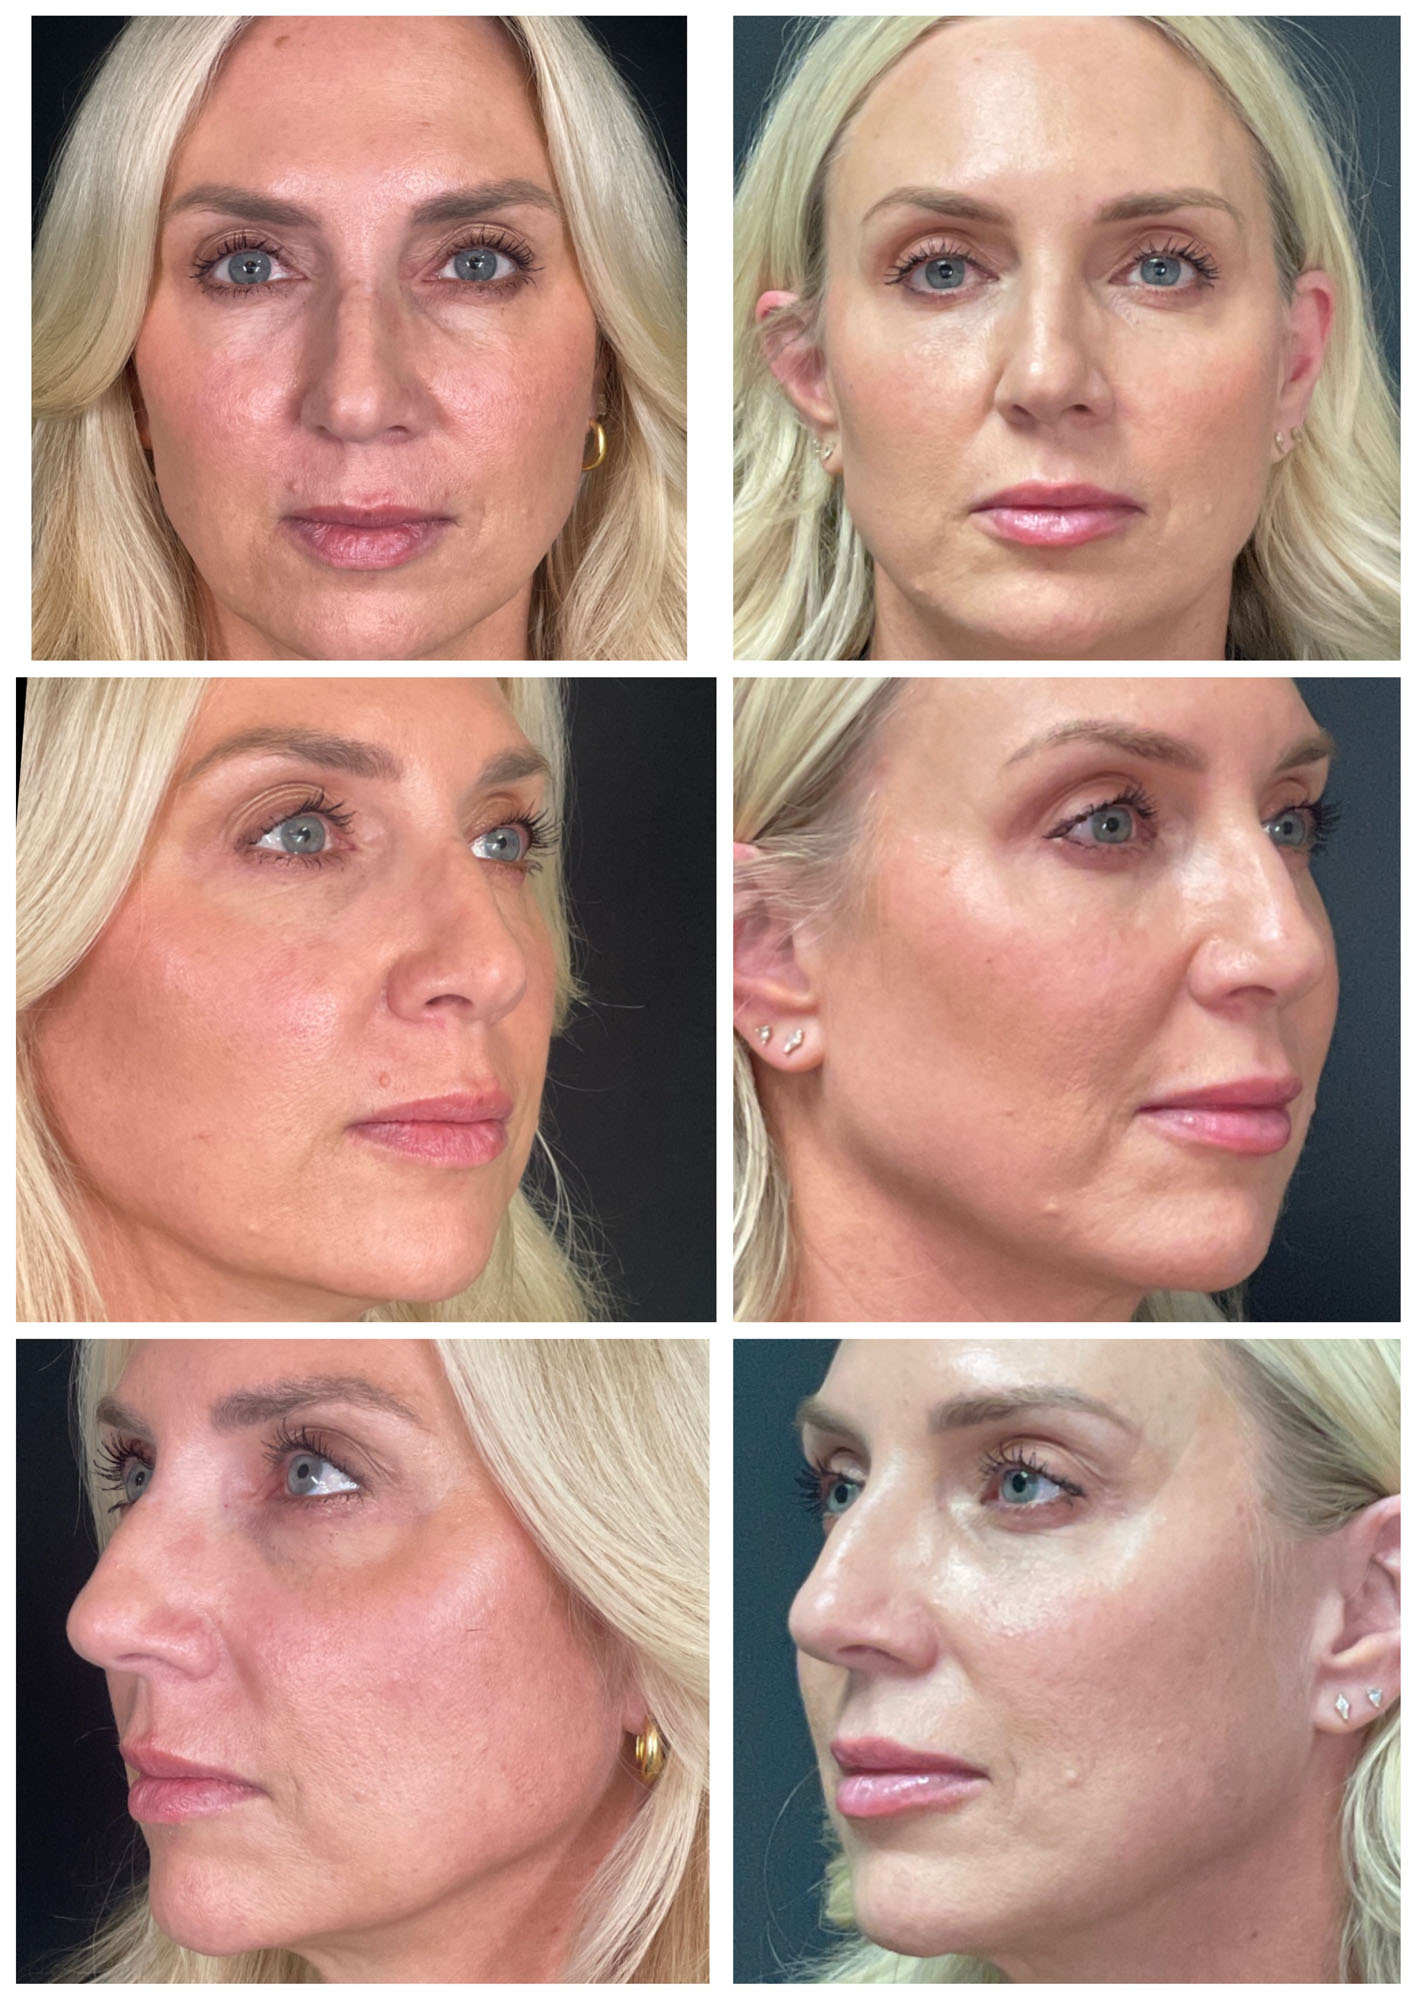 Sculptra Face Before and After images from Refresh Aesthetic Center in Whitefish Bay WI